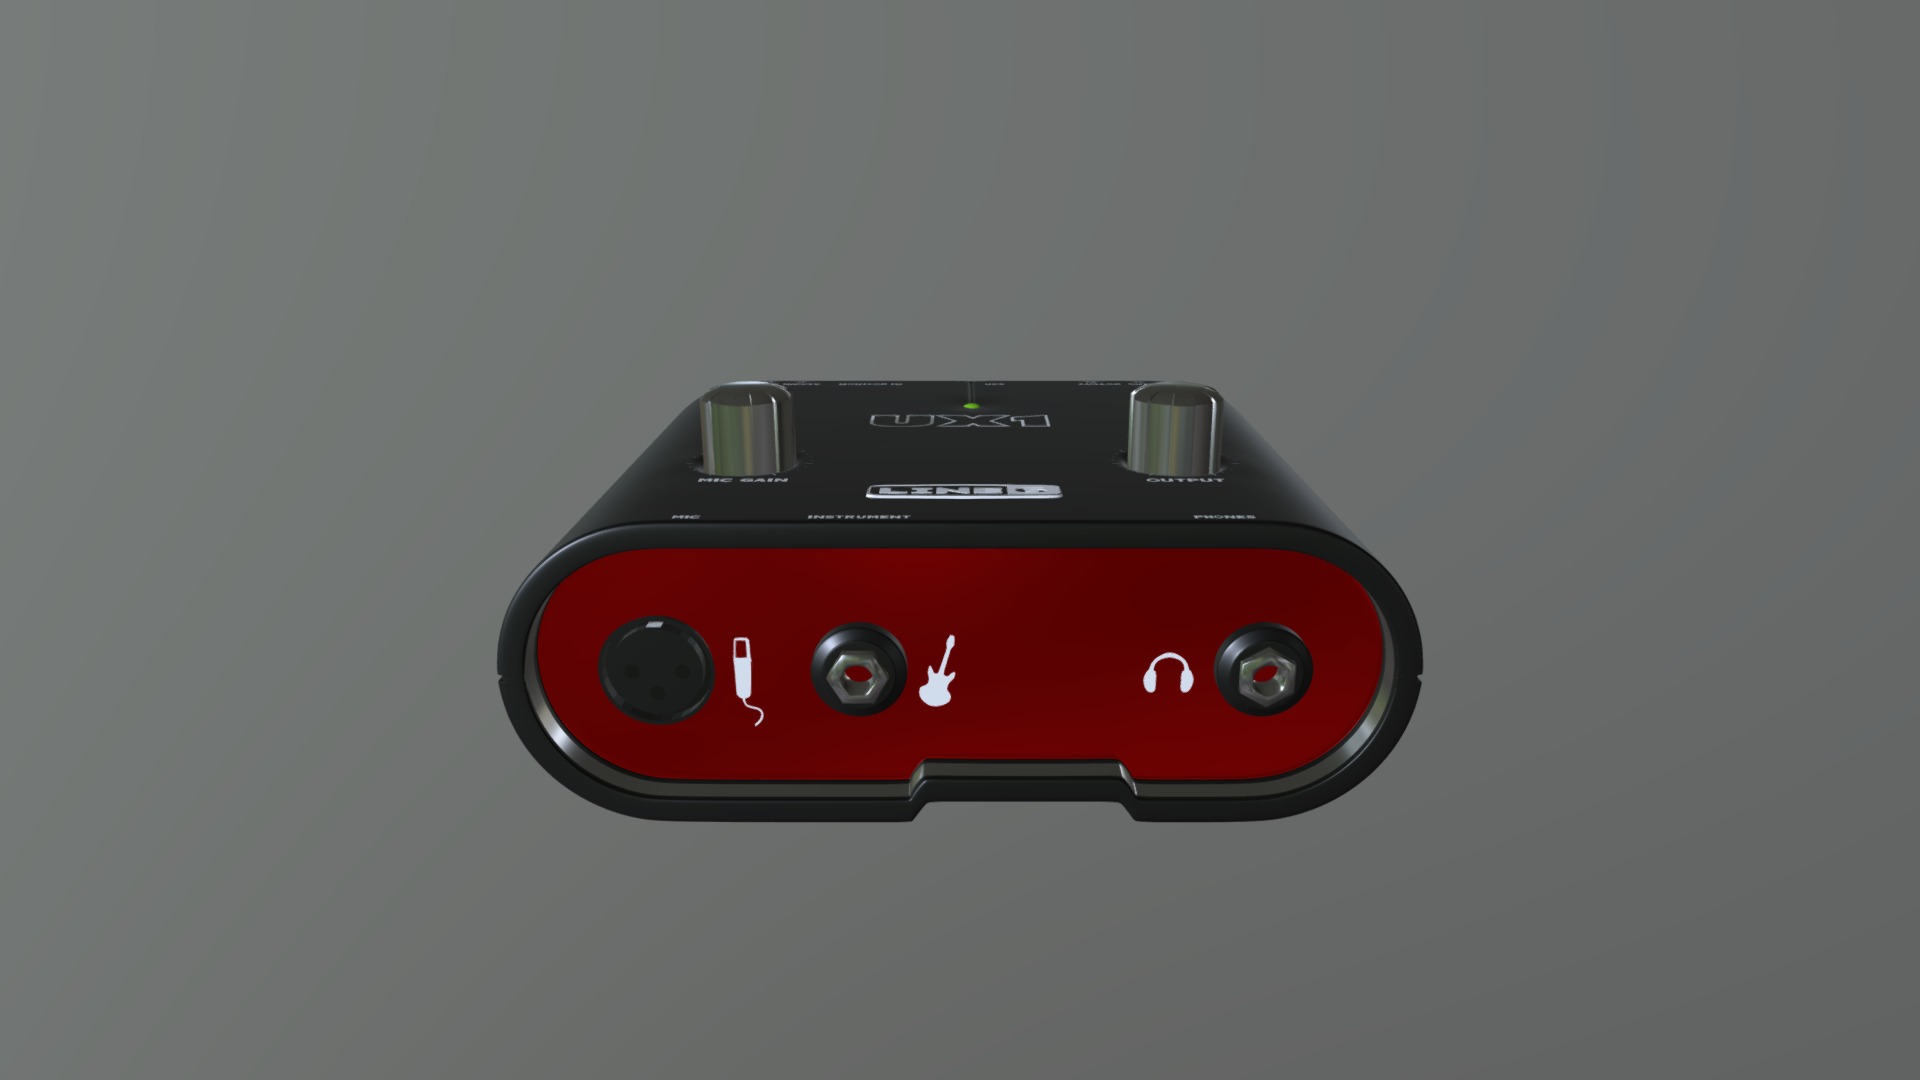 3D model UX1 – ZOOM Line6 - This is a 3D model of the UX1 - ZOOM Line6. The 3D model is about graphical user interface.